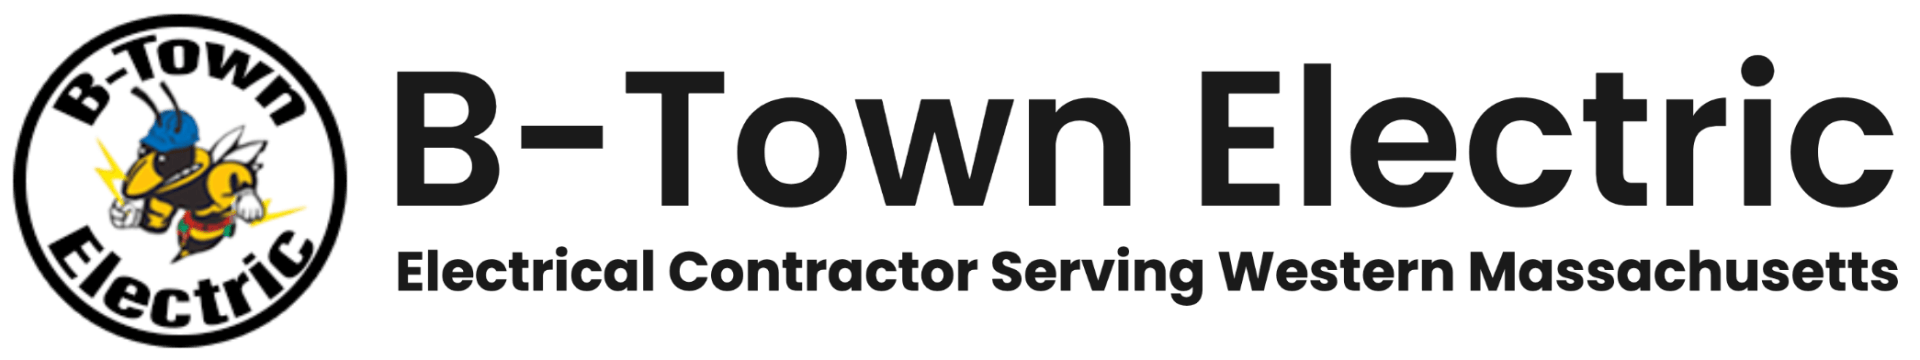 B-Town Electric Electrical Contractors in Belchertown MA